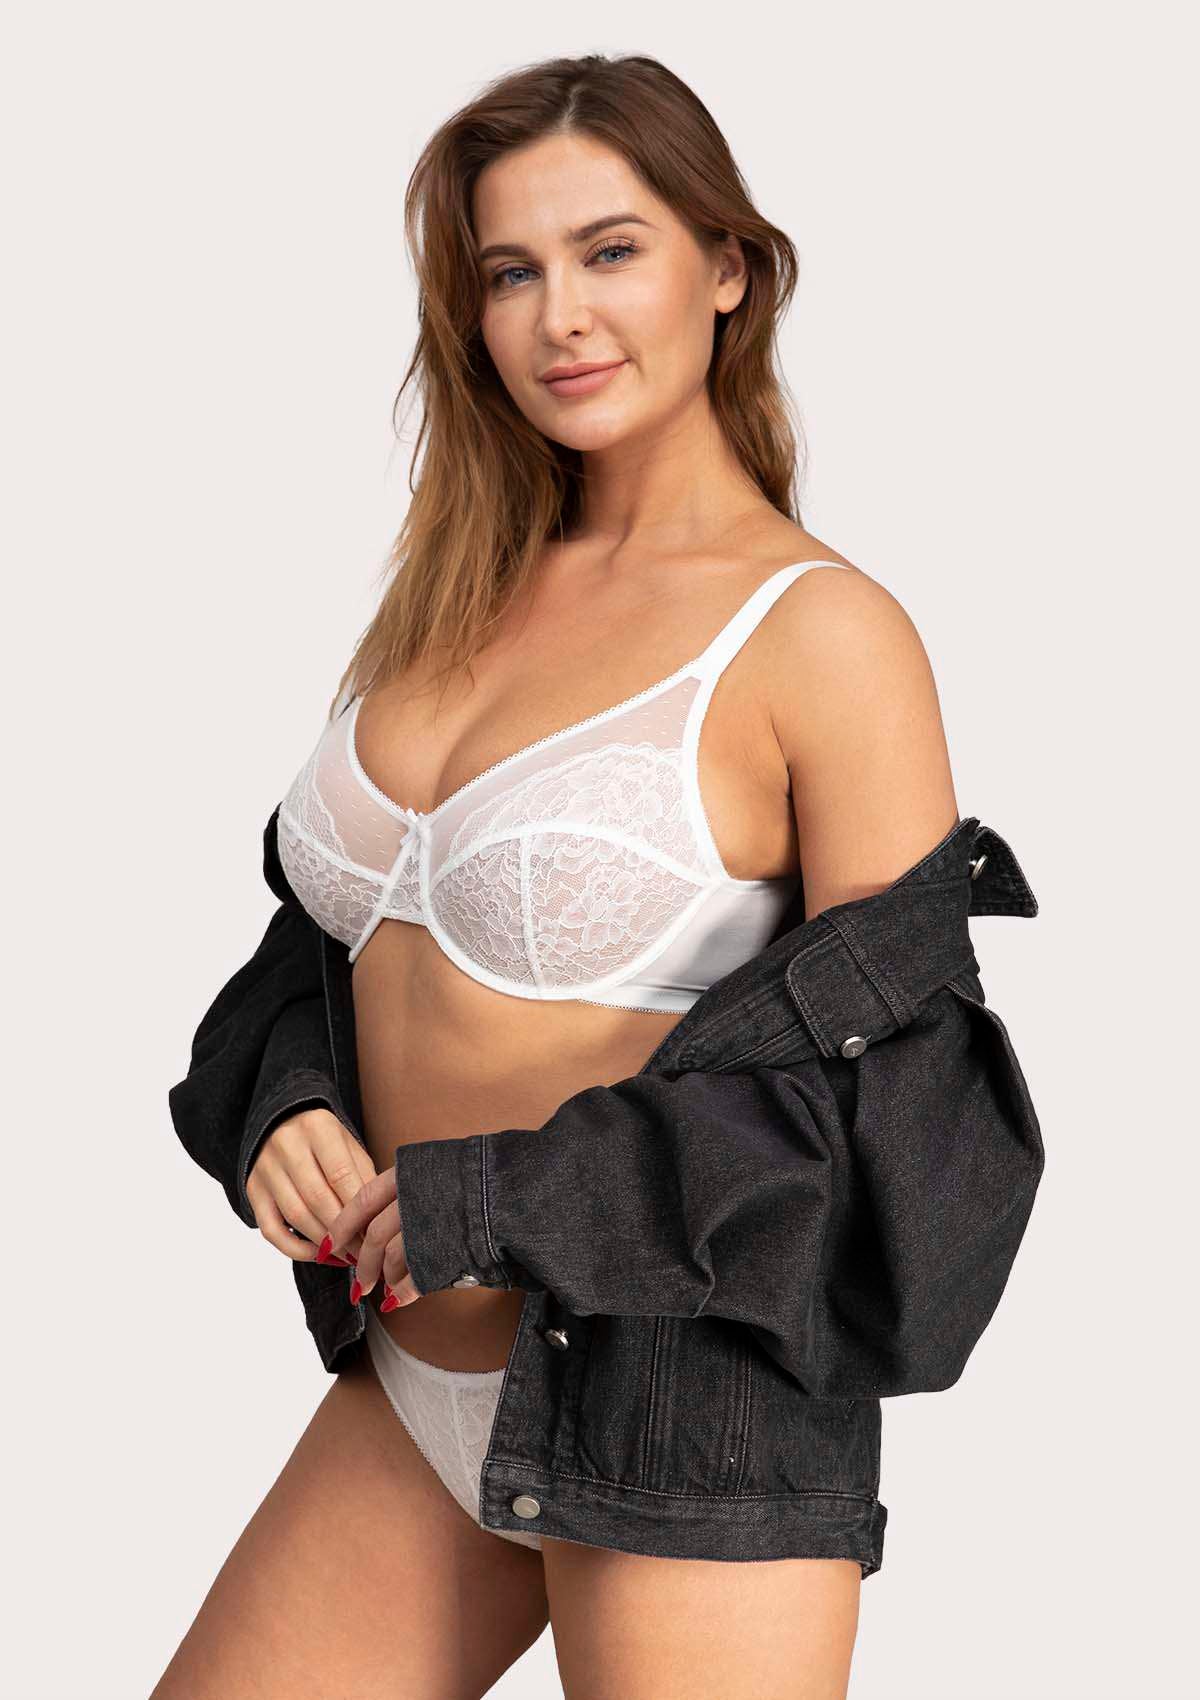 HSIA Enchante Lace Bra And Panties Set: Bra For Side And Back Fat - White / 34 / C